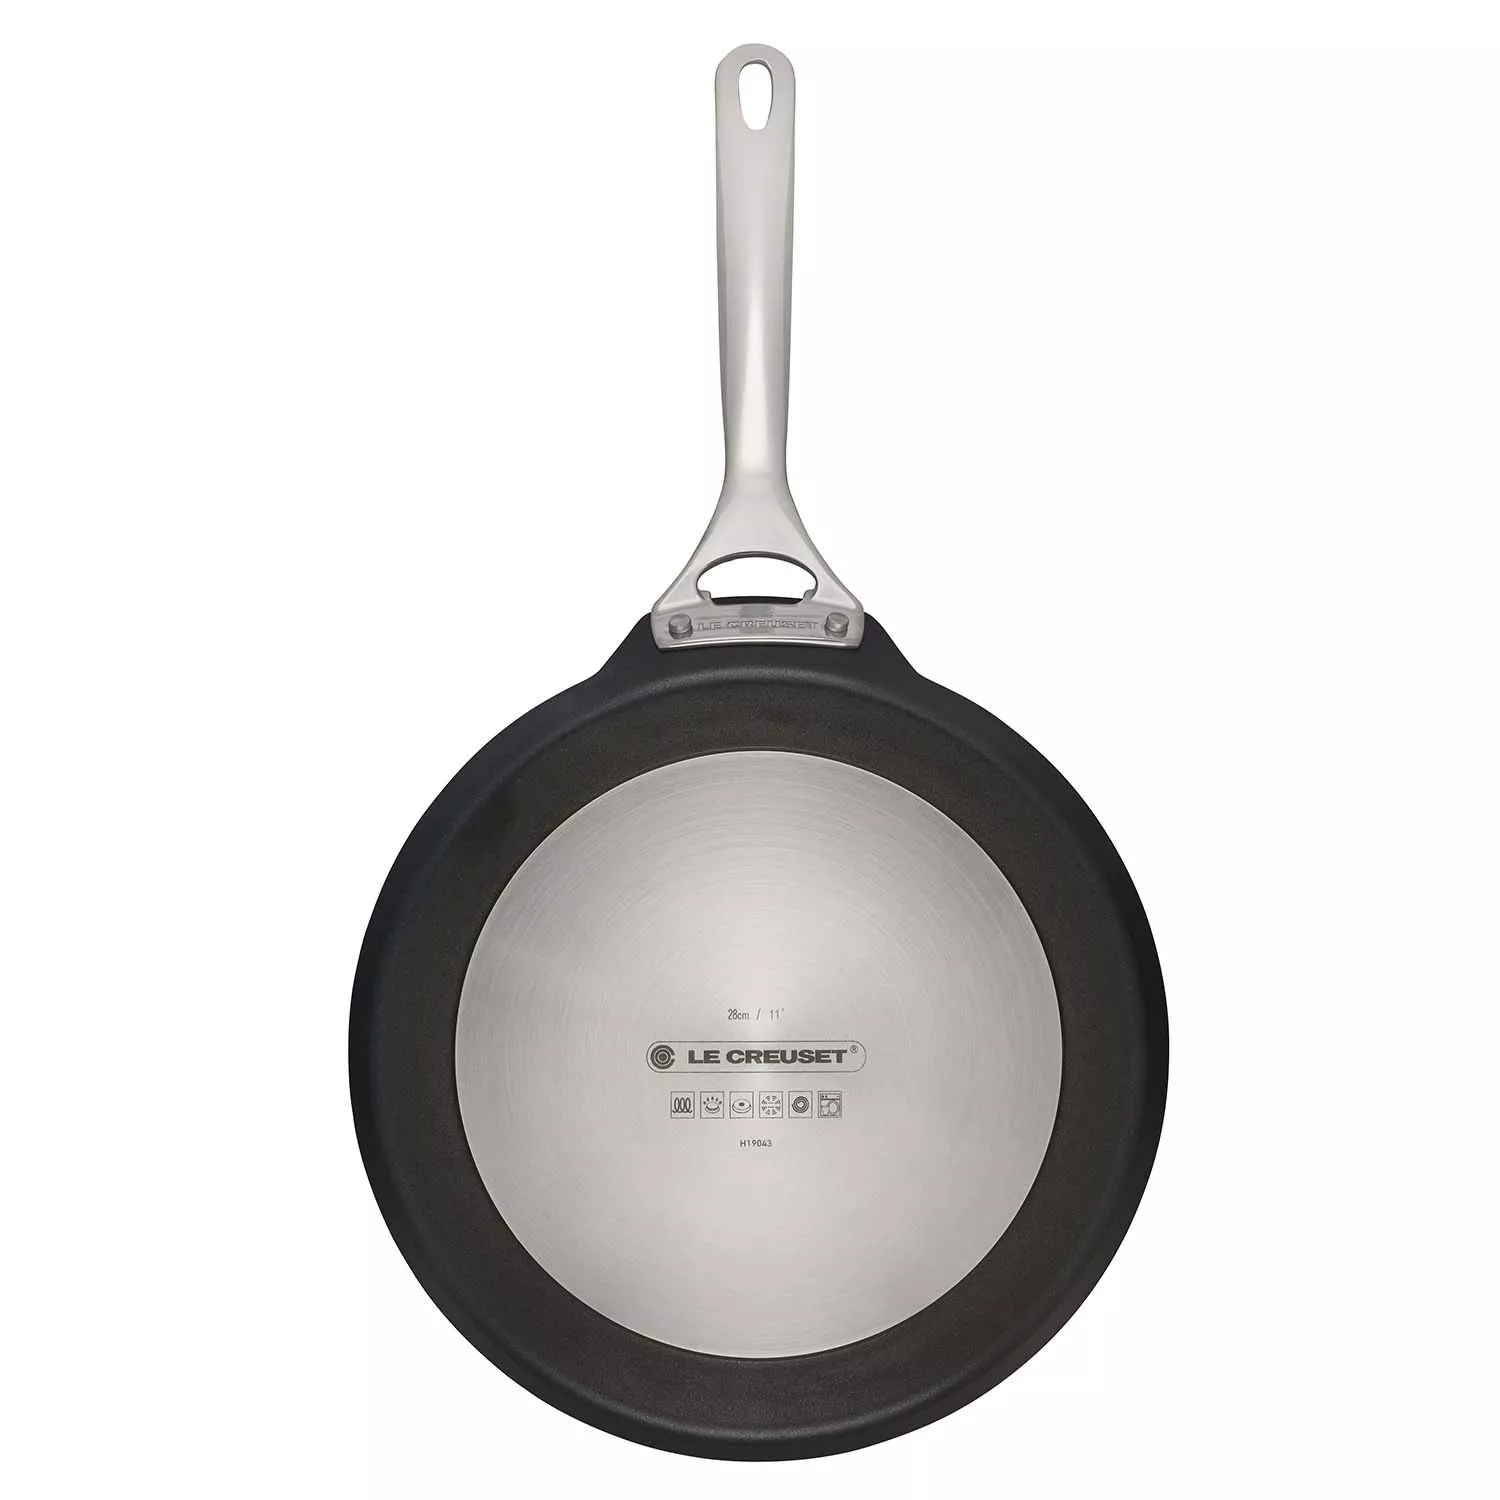 Cook Crepes like a Pro with Le Creuset's Nonstick Crepe Pan